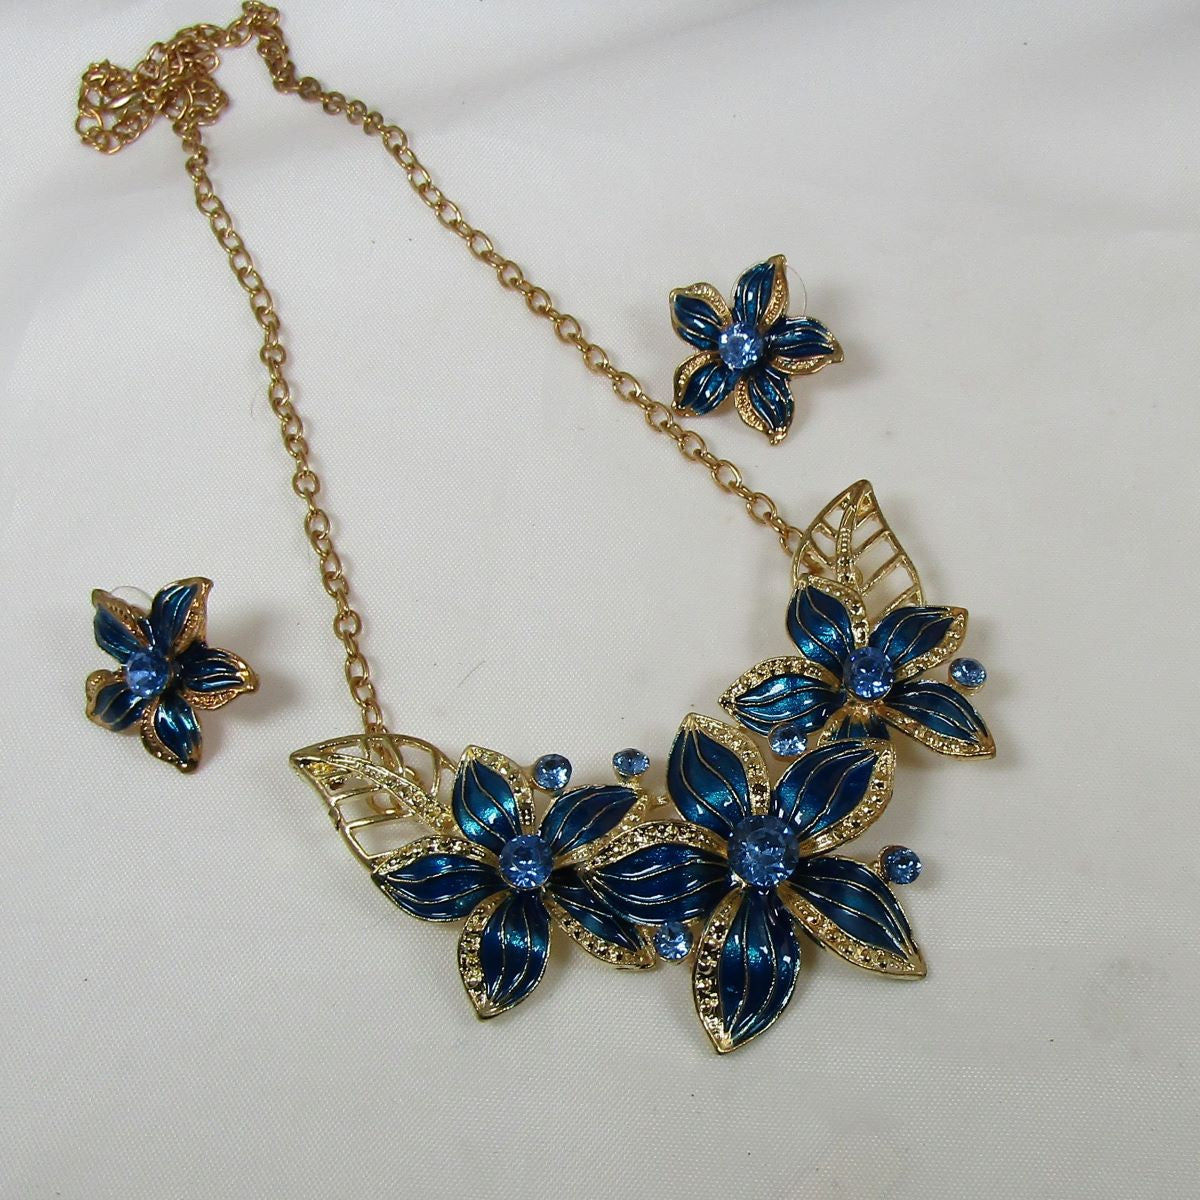 Blue & Gold Flower Necklace with Gold Chain & Earrings - VP's Jewelry